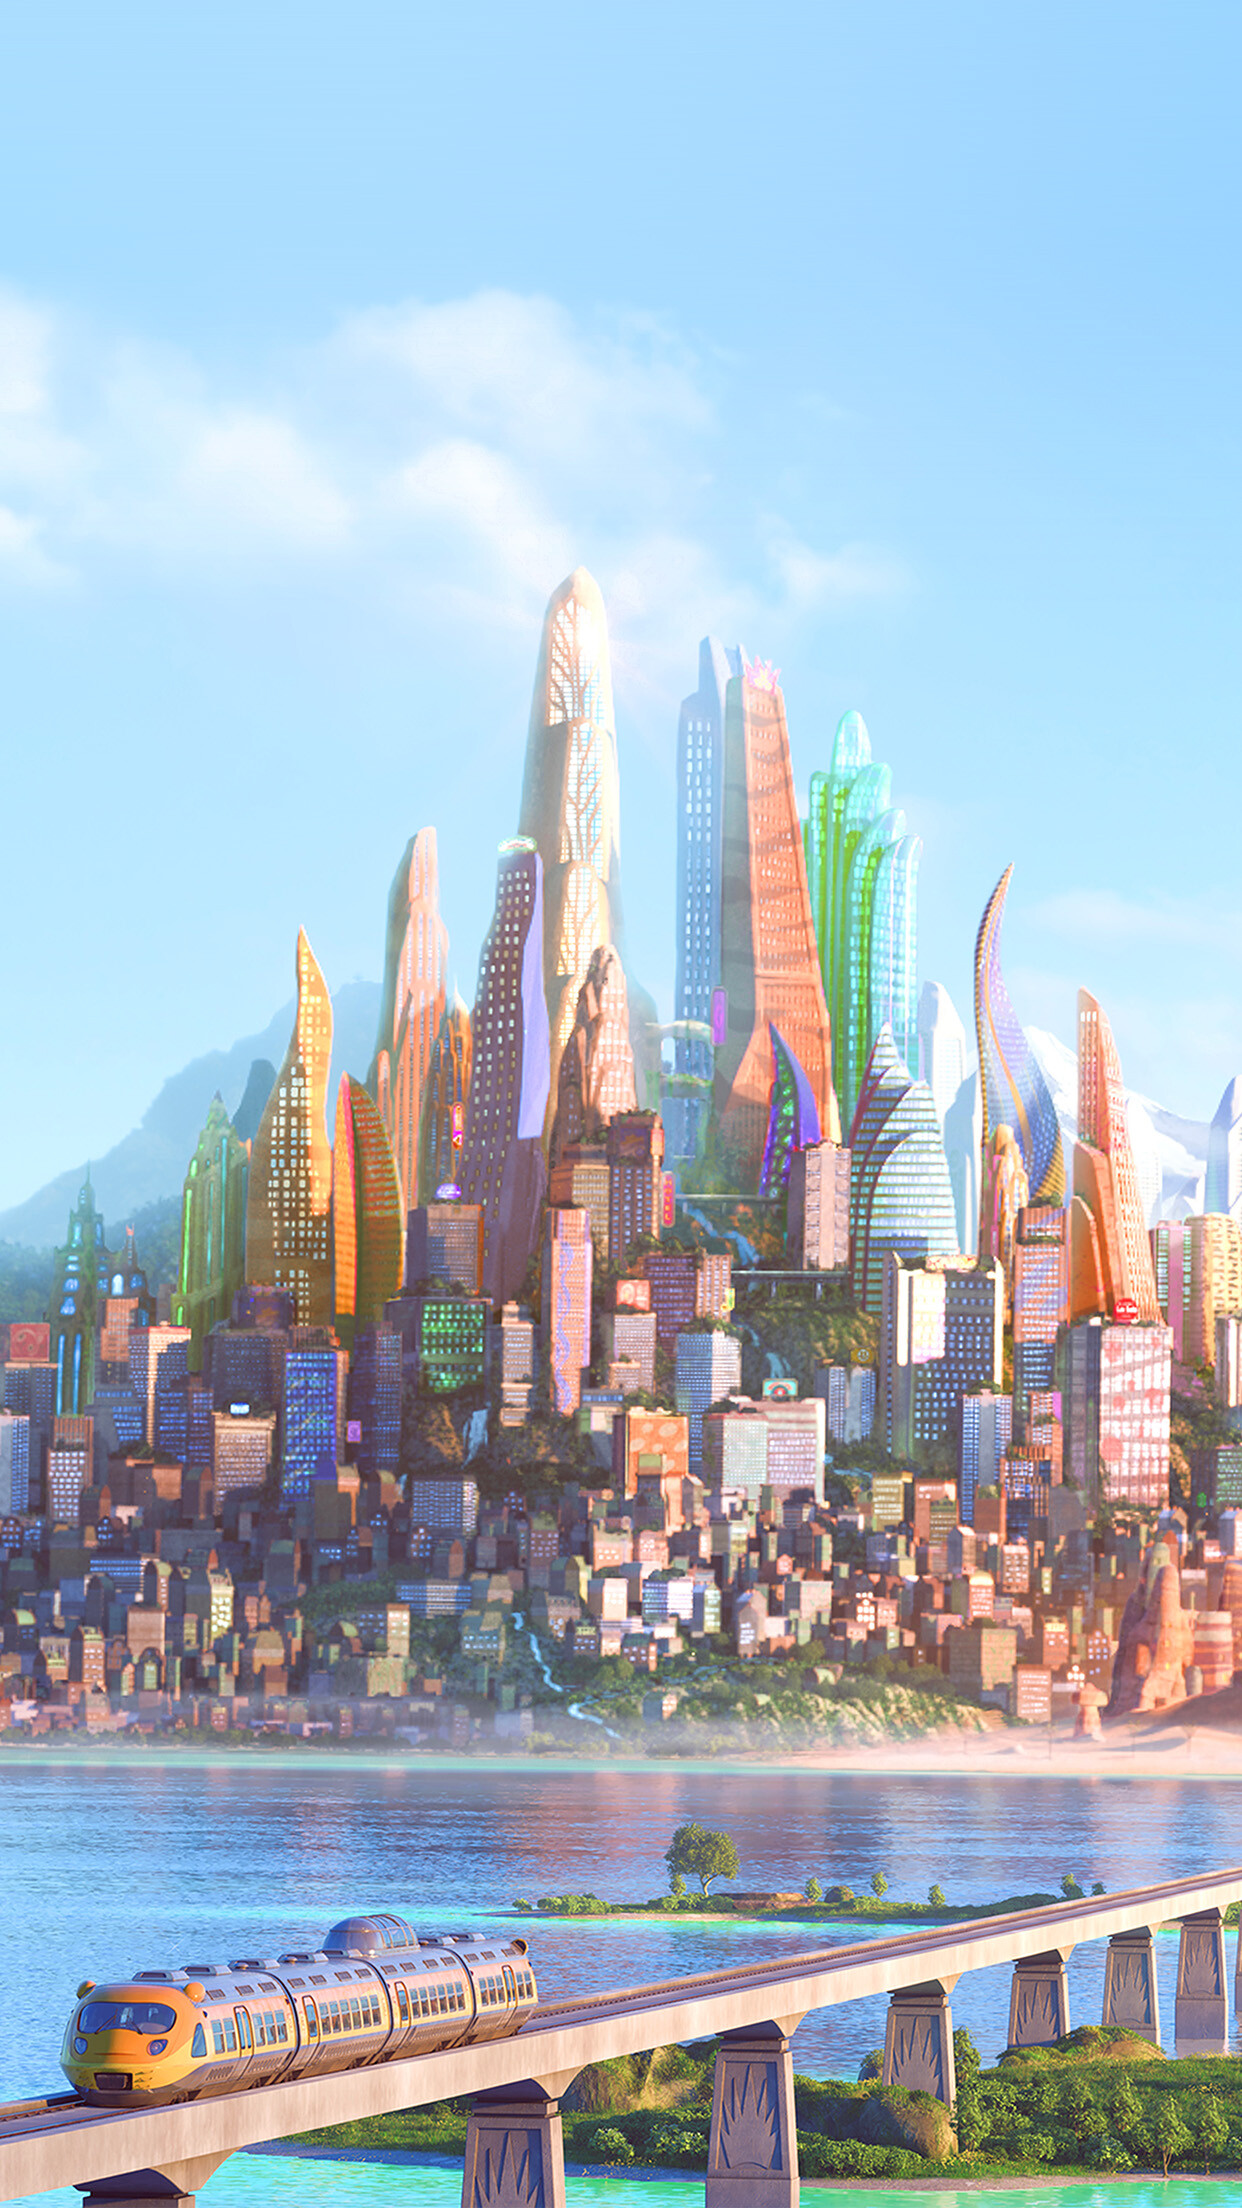 Zootopia: The 55th animated feature in the Walt Disney Animated Classics series. 1250x2210 HD Wallpaper.